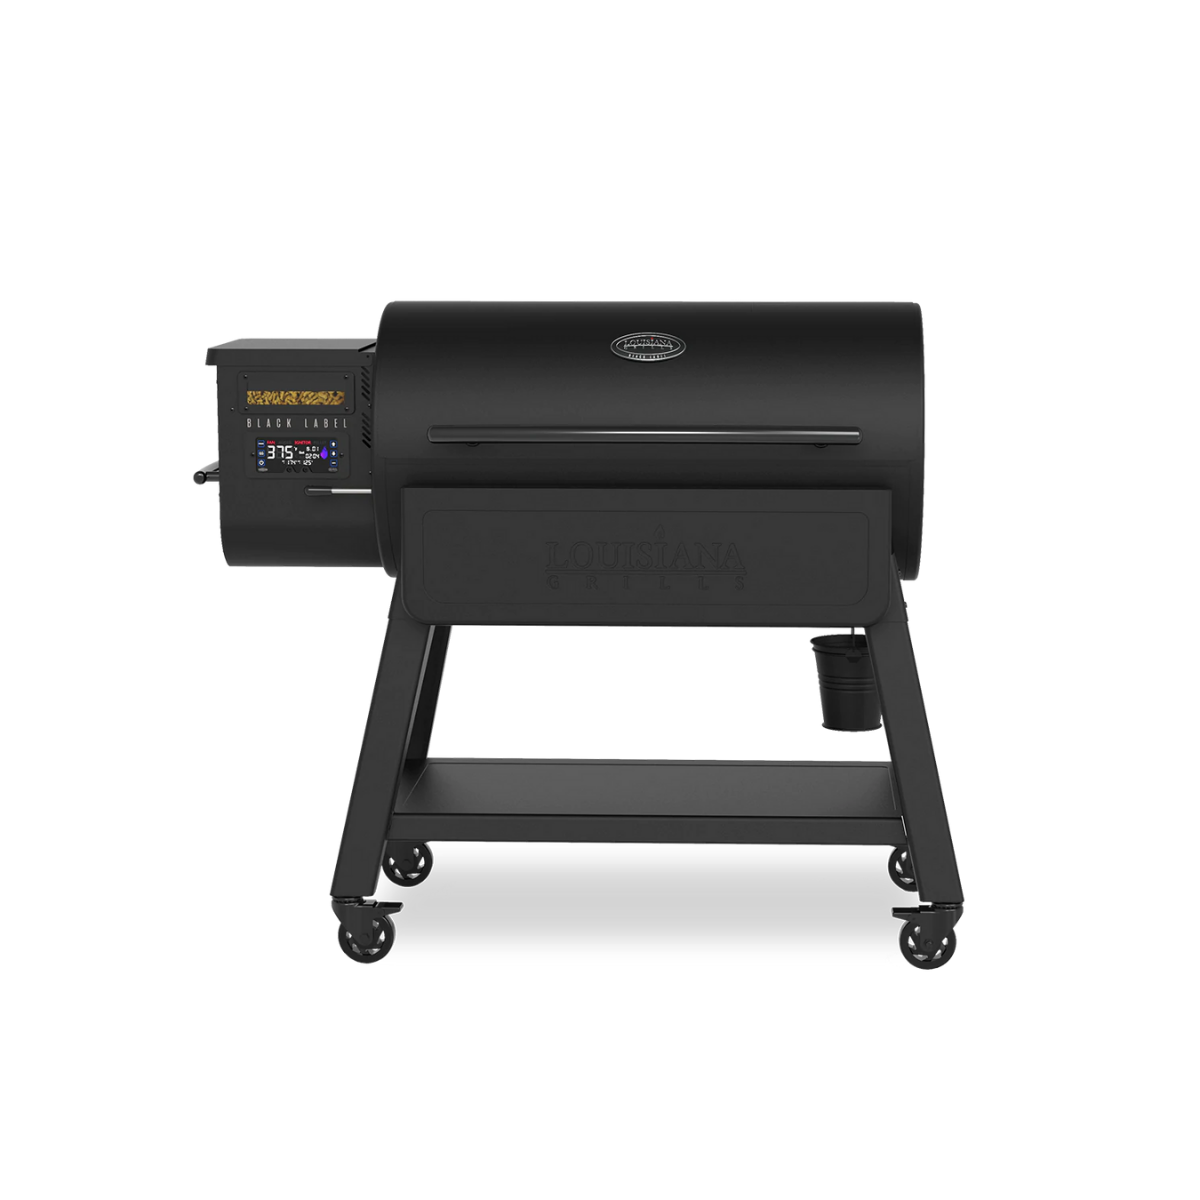 1200 Black Label Series Grill With Wifi Control